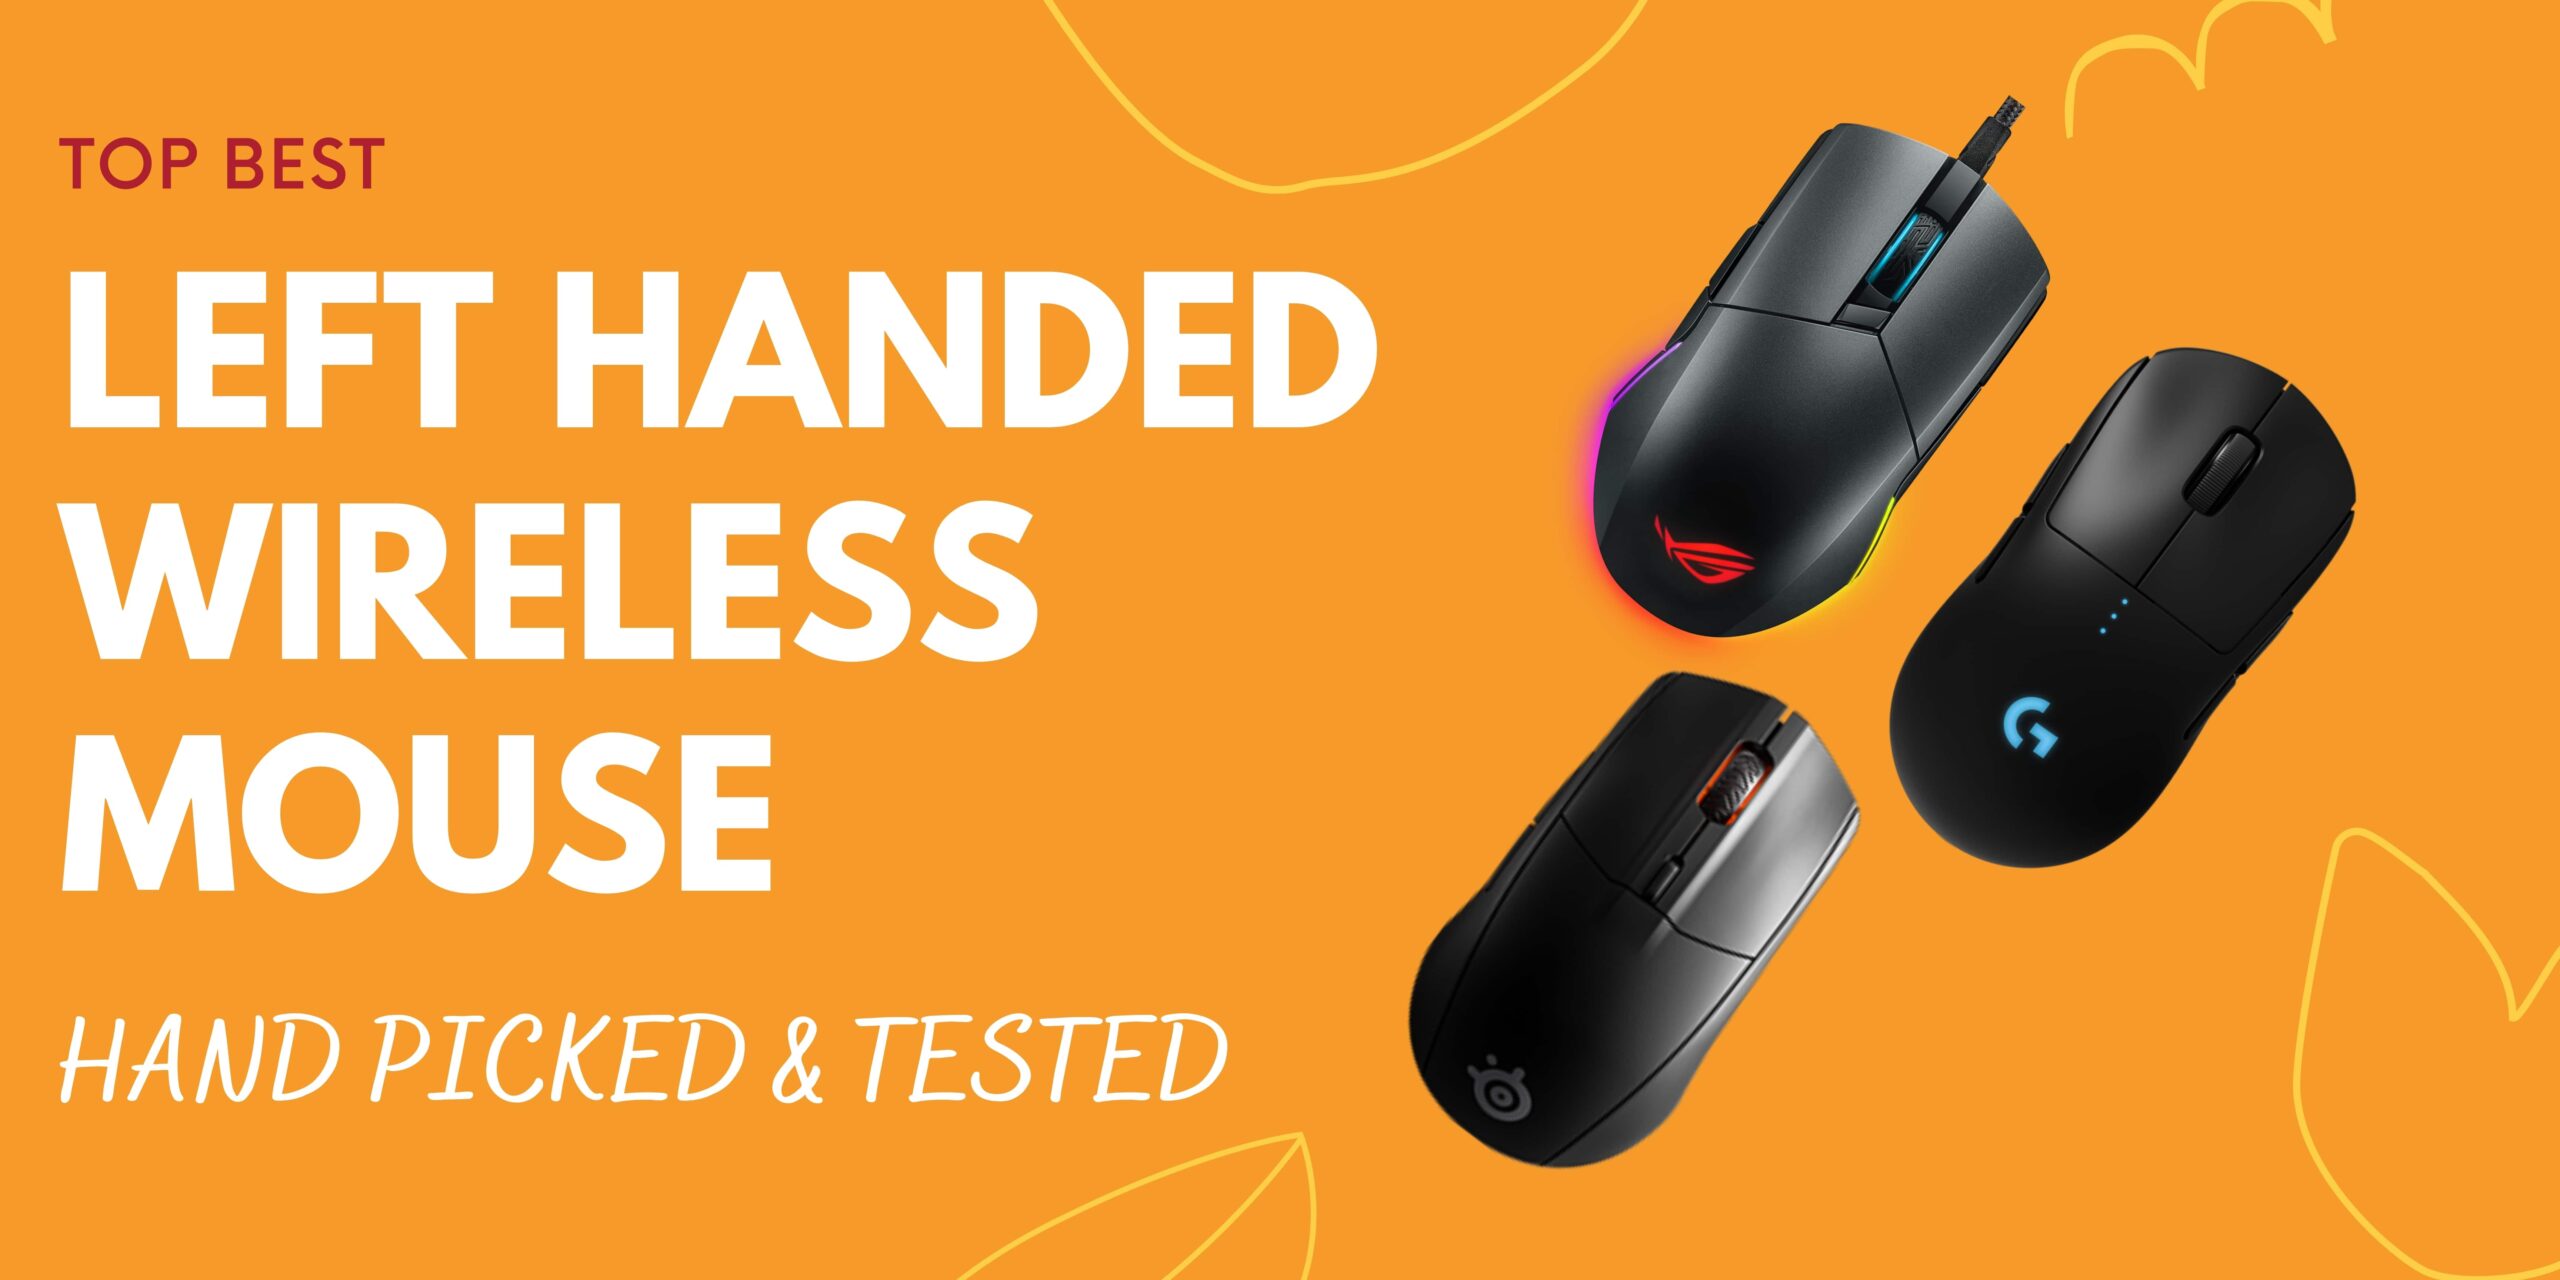 Left Handed Wireless Mouse